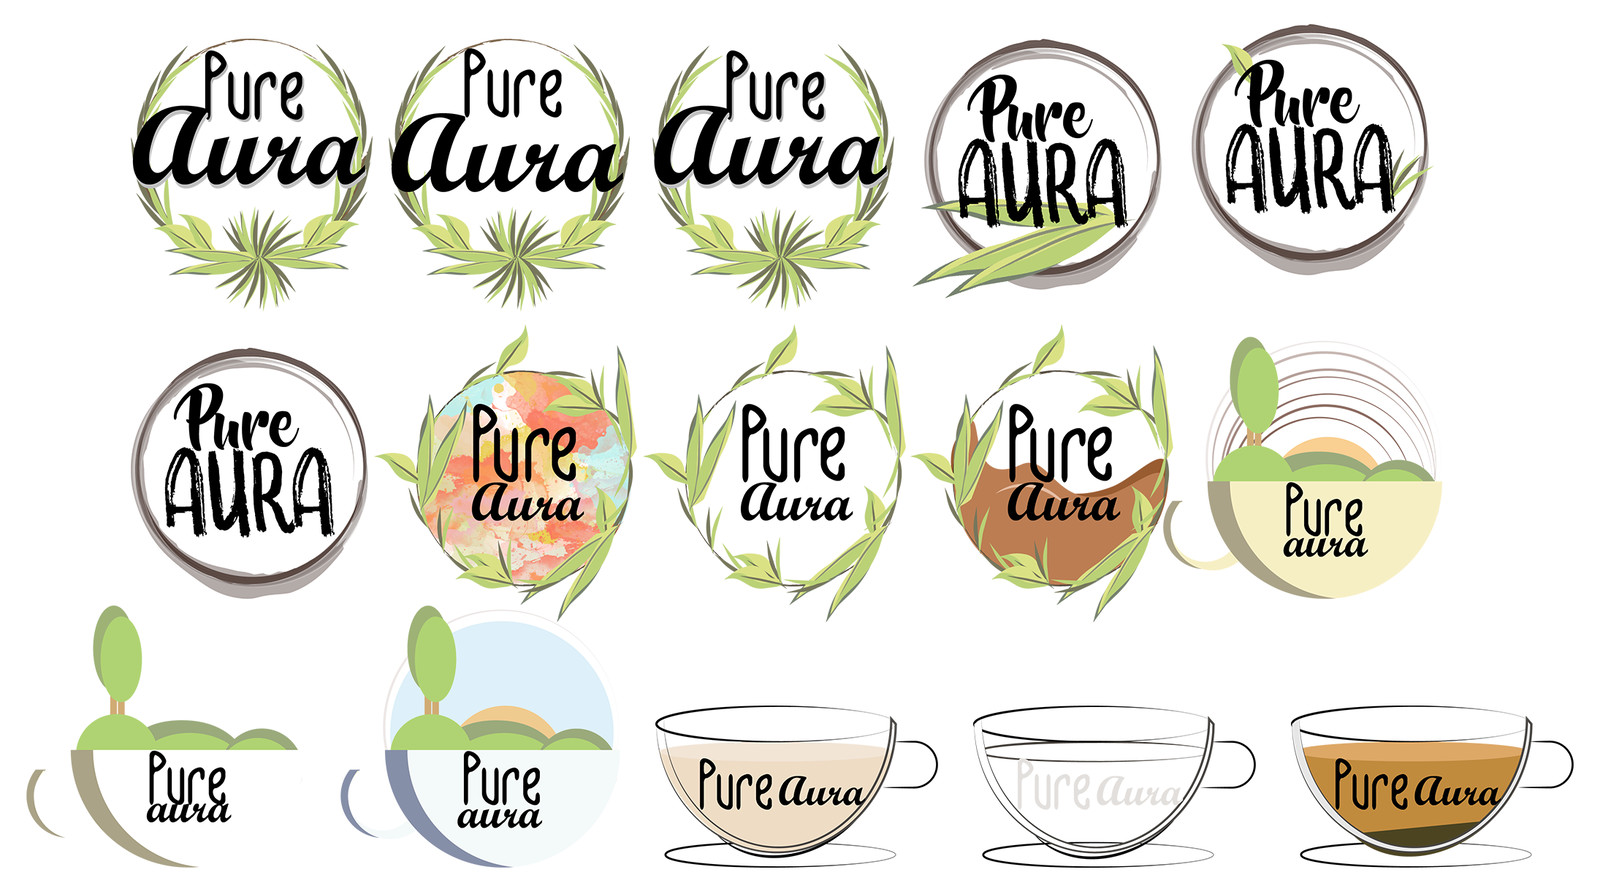 Pure Aura Logo Design Process
Initial concepts, for the Pure Aura branding, the final product combined different elements from the first set and last set.